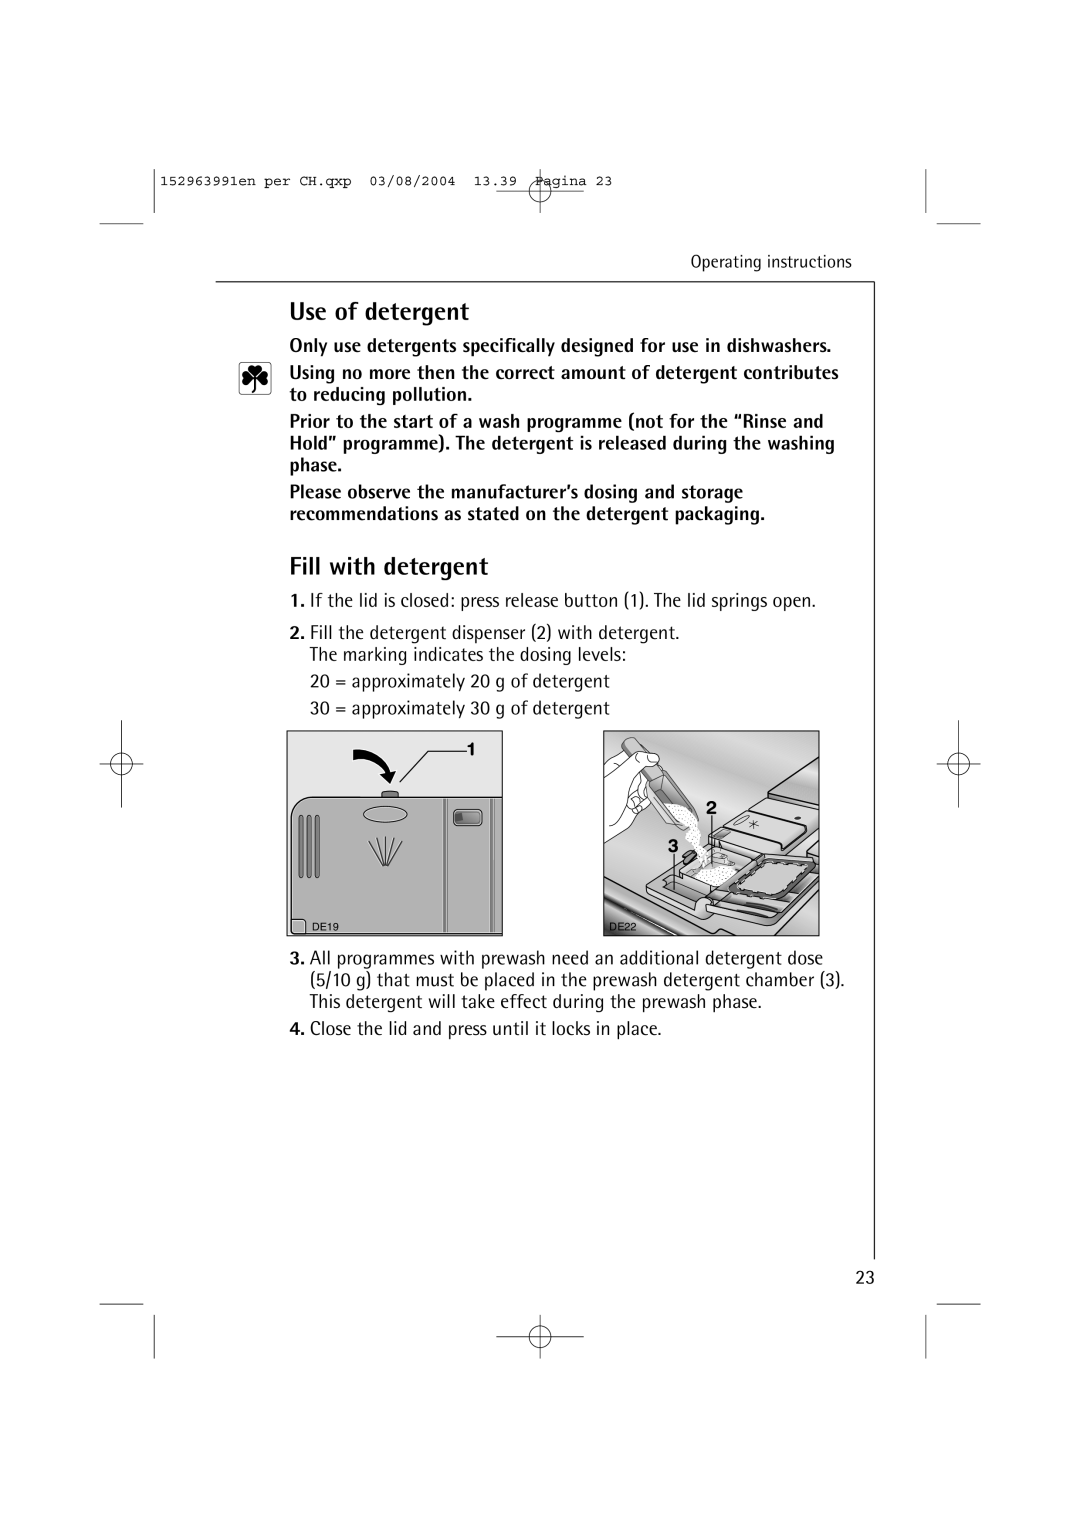 AEG 88070 manual Use of detergent, Fill with detergent, 20 = approximately 20 g of detergent 